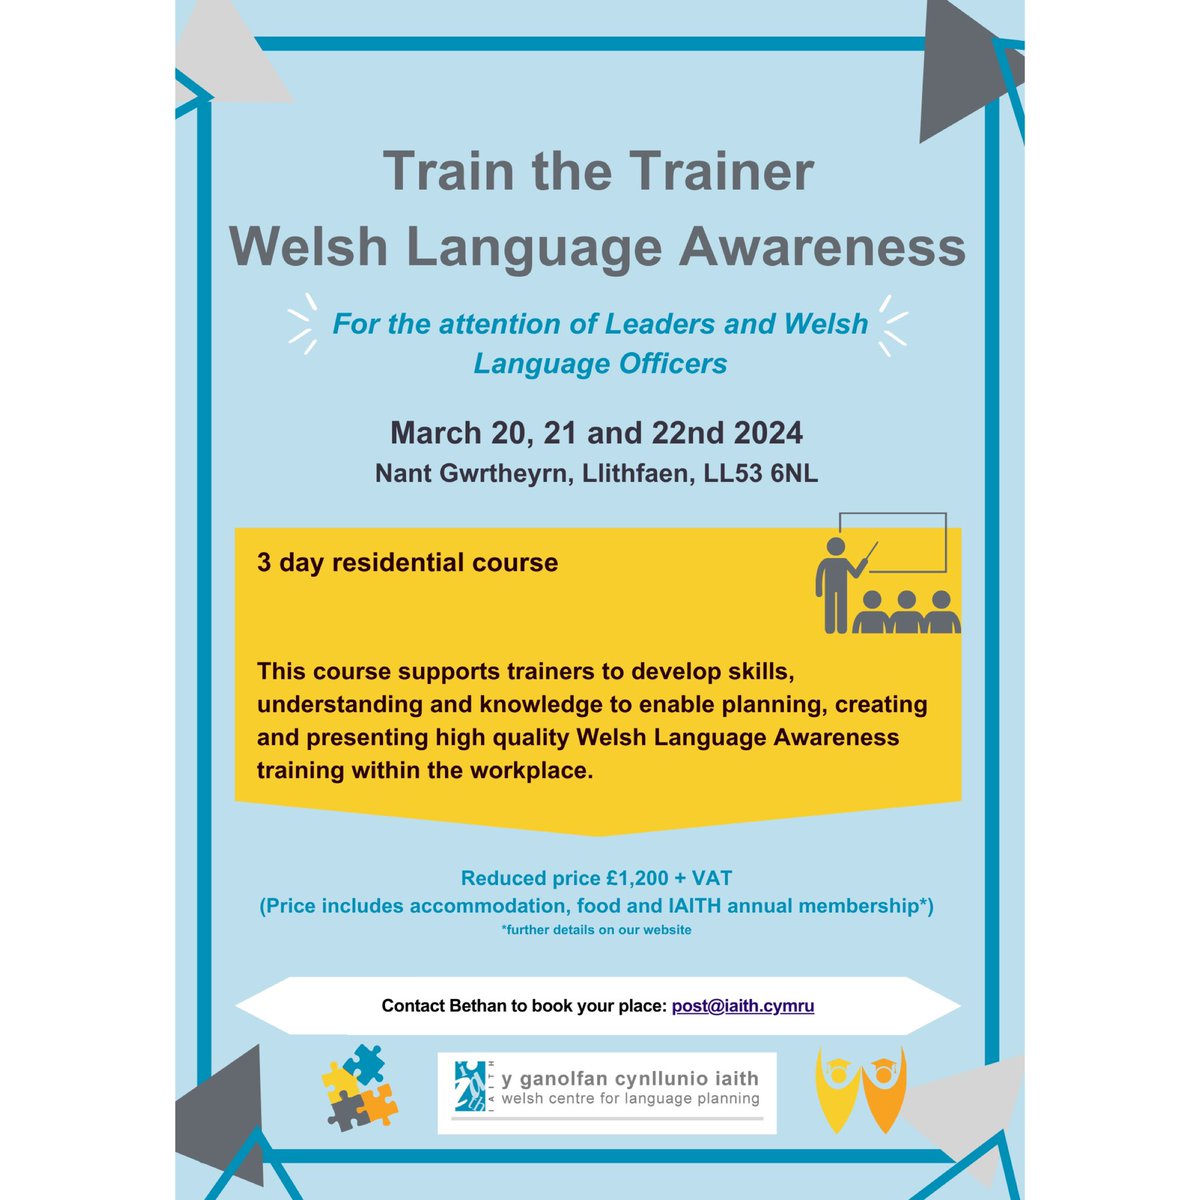 *Book your place on our residential training before March the 1st.* Train the Trainer Welsh Language Awareness March 20, 21 and 22nd 2024 Nant Gwrtheyrn, Llithfaen, LL53 6NL 3 day residential course Contact Bethan to book your place: post@iaith.cymru